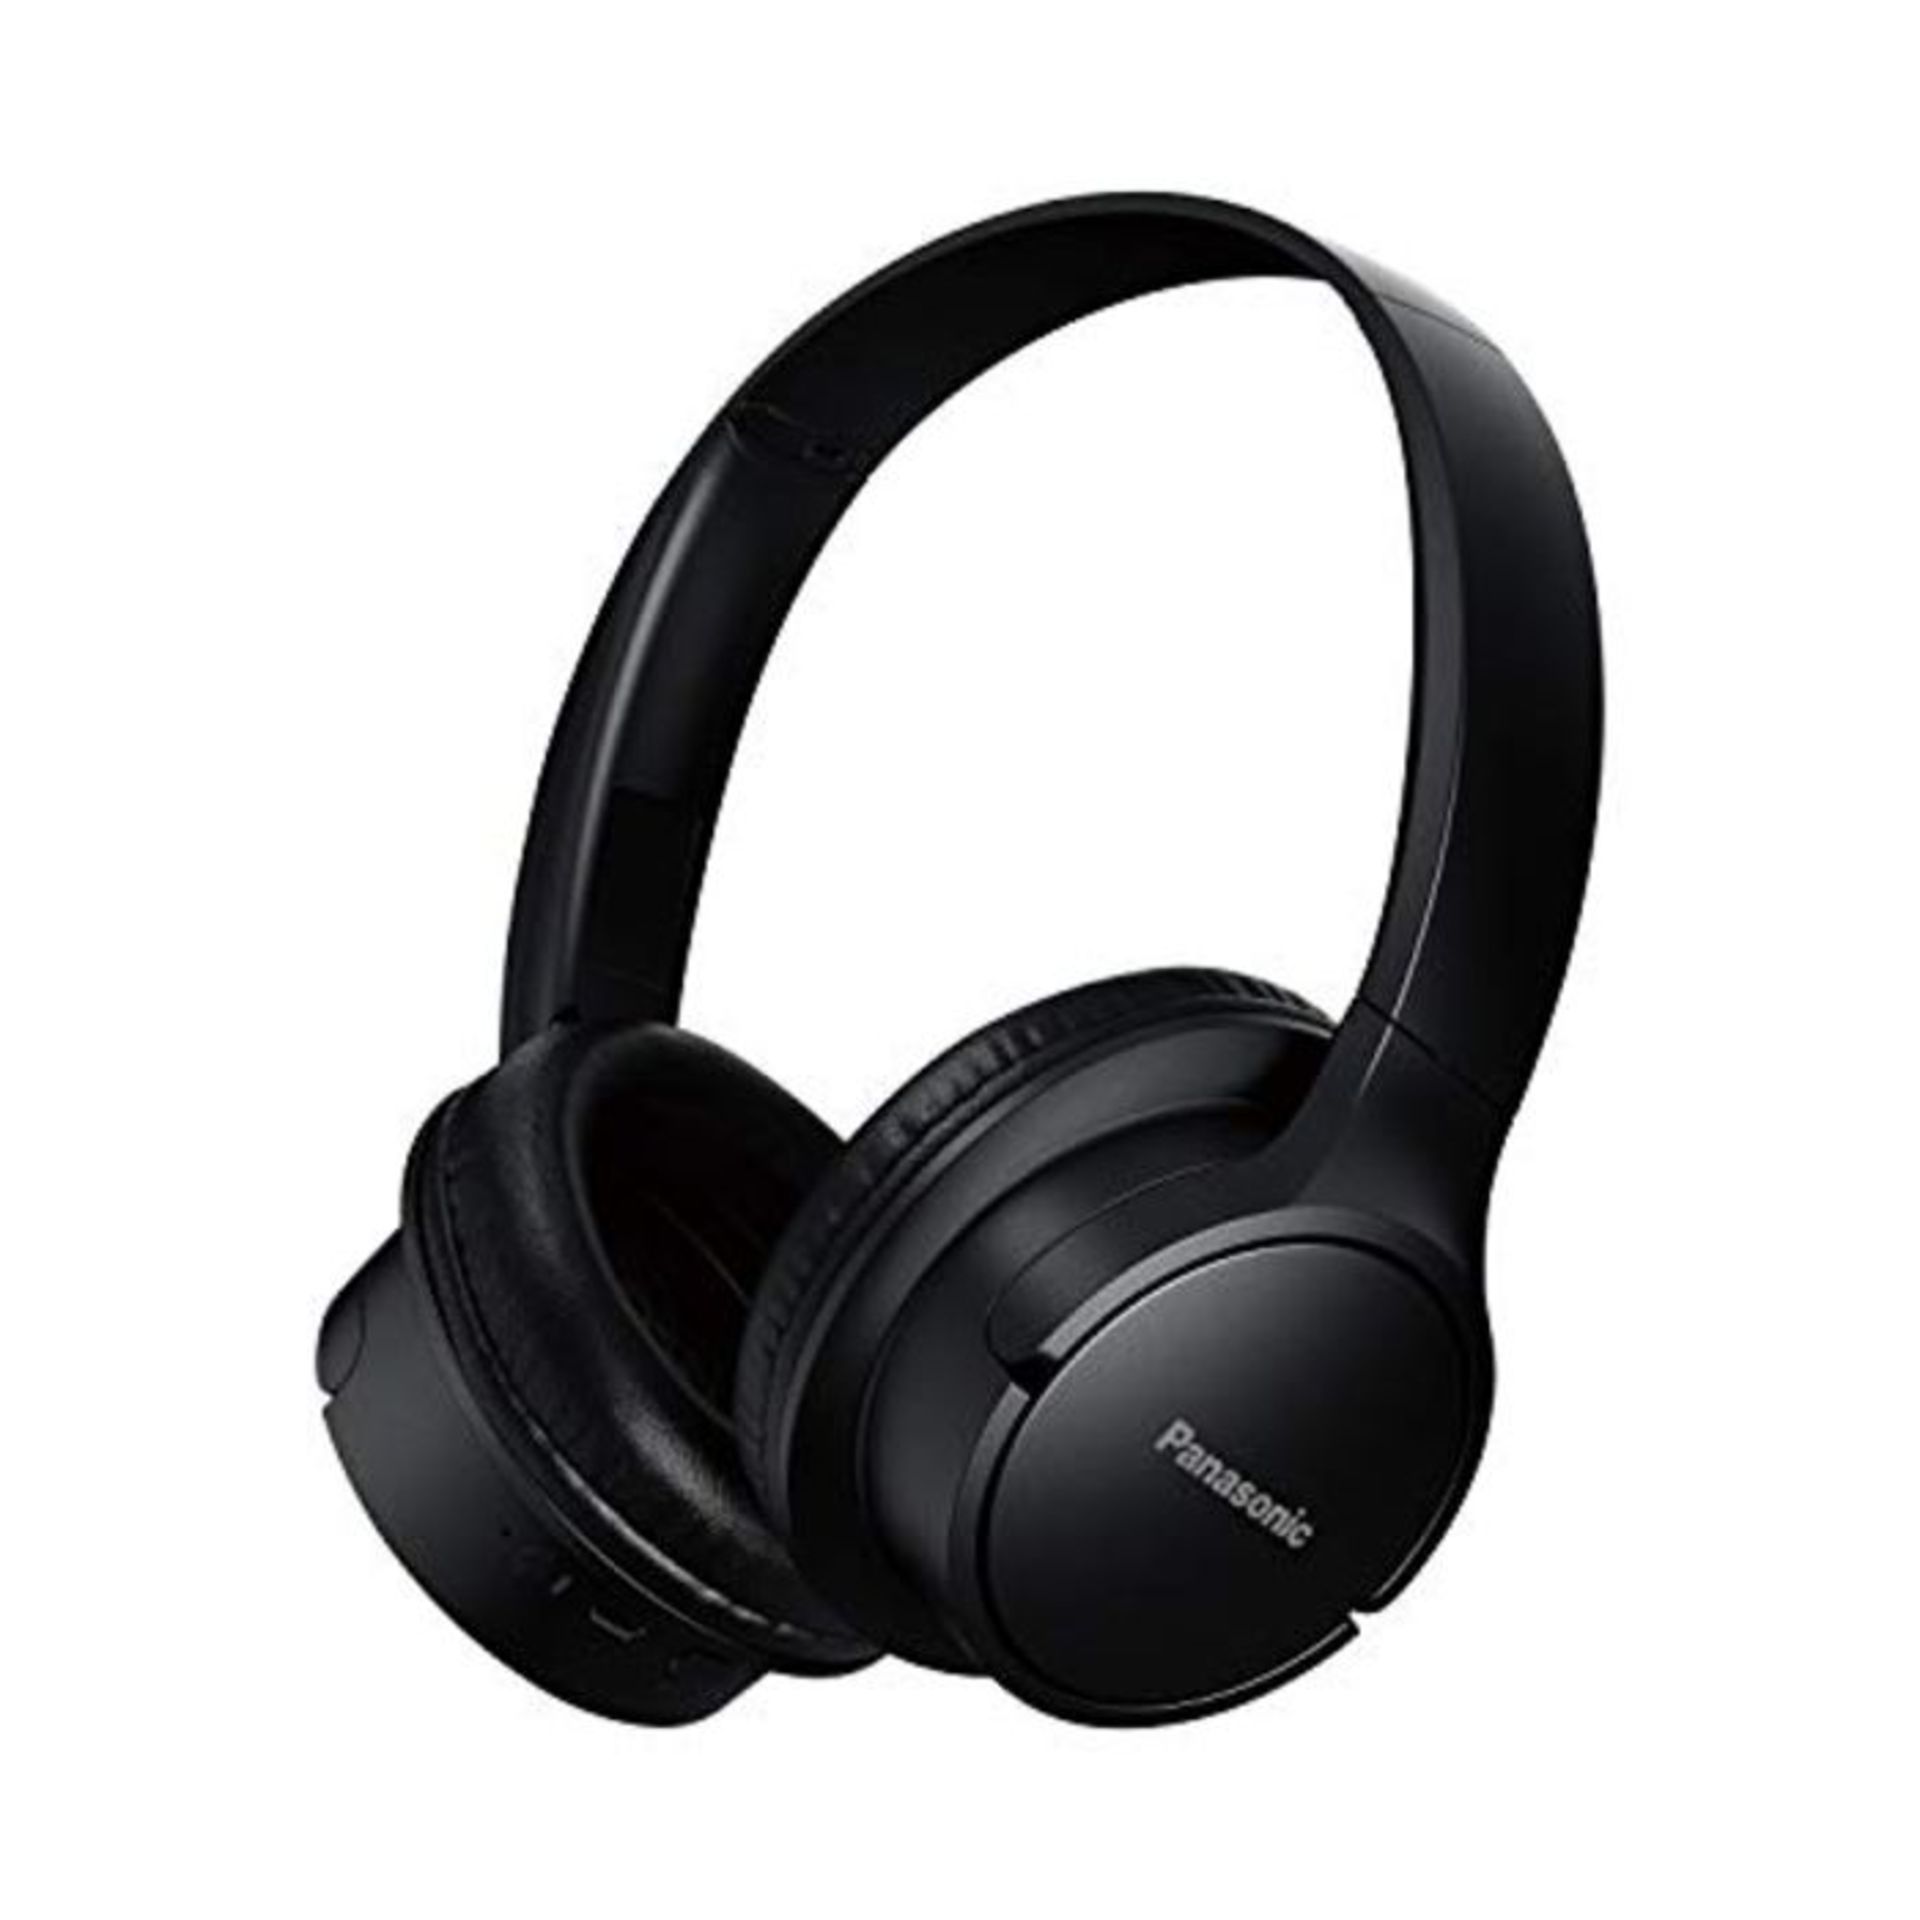 Panasonic RB-HF520BE-K Bluetooth Over-Ear Headphones (Voice Control, Wireless, Up to 5